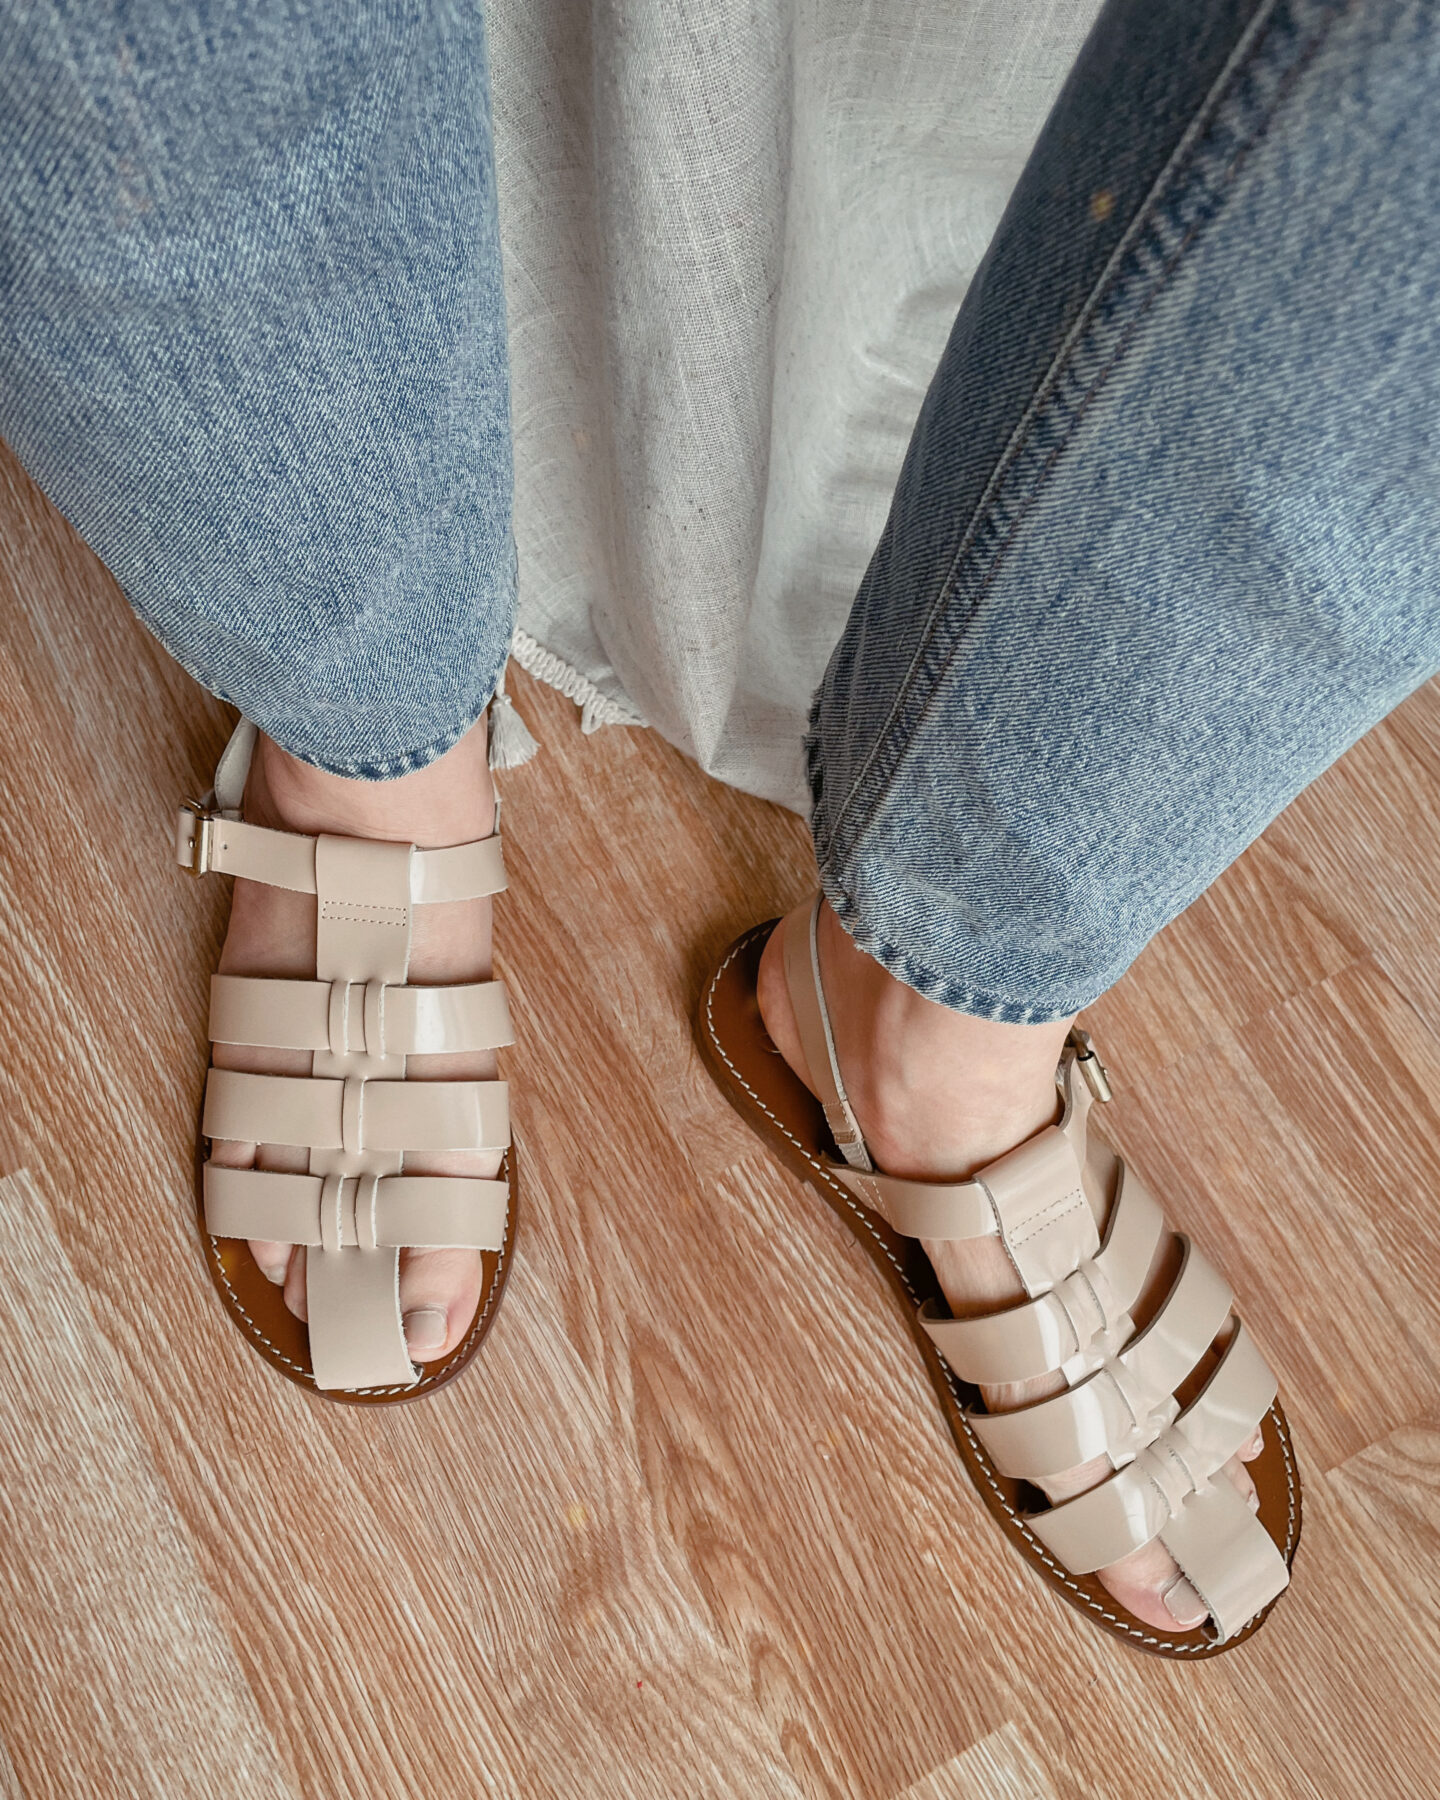 Karin Emily wears fisherman sandals with light wash jeans